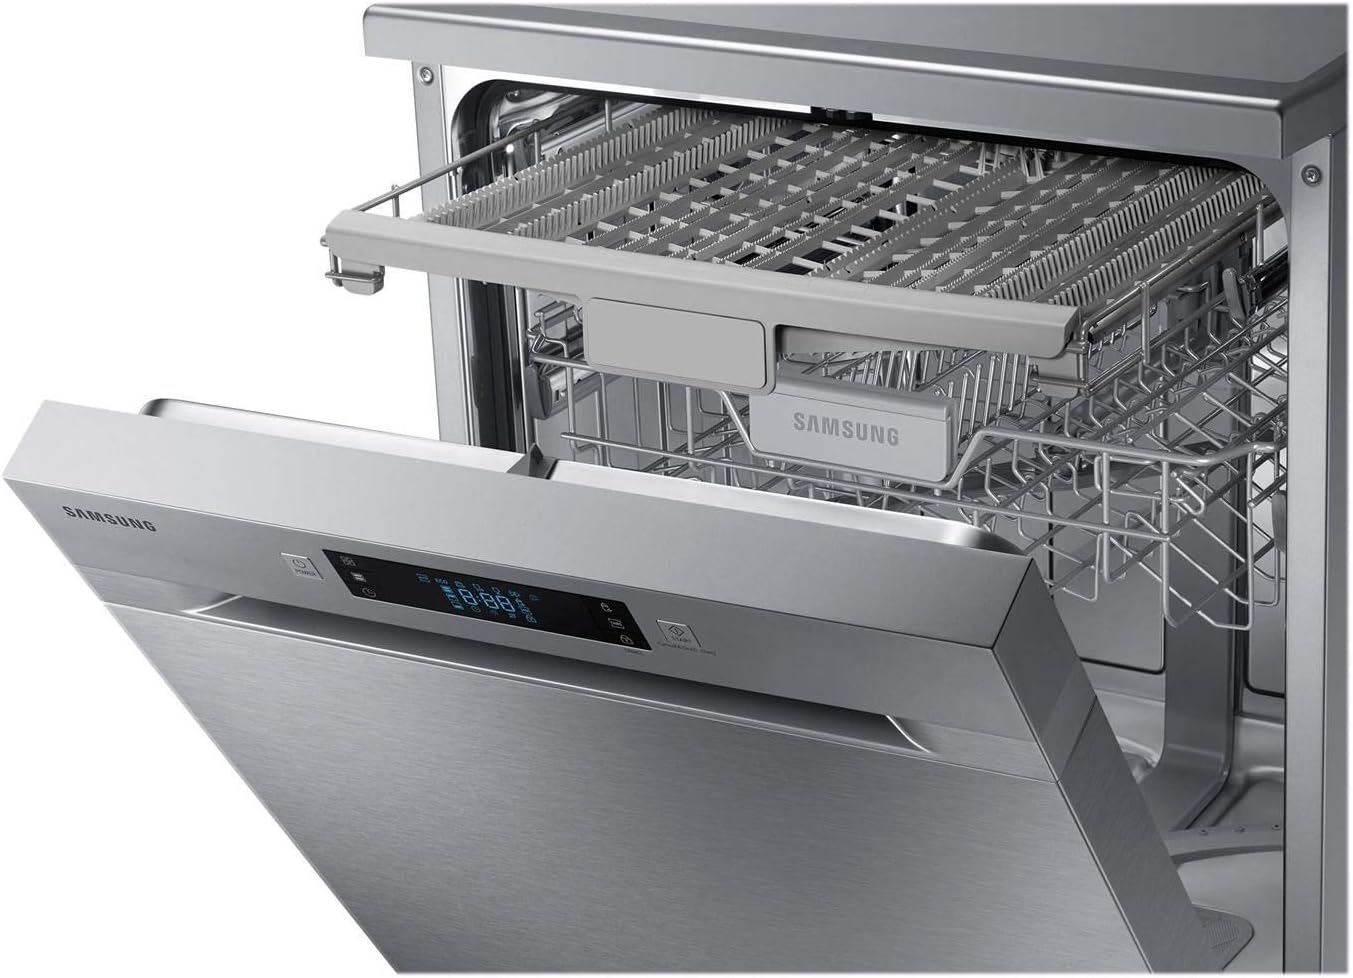 Samsung DW60M6050FS Freestanding A++ Rated Dishwasher - Stainless Steel - Amazing Gadgets Outlet